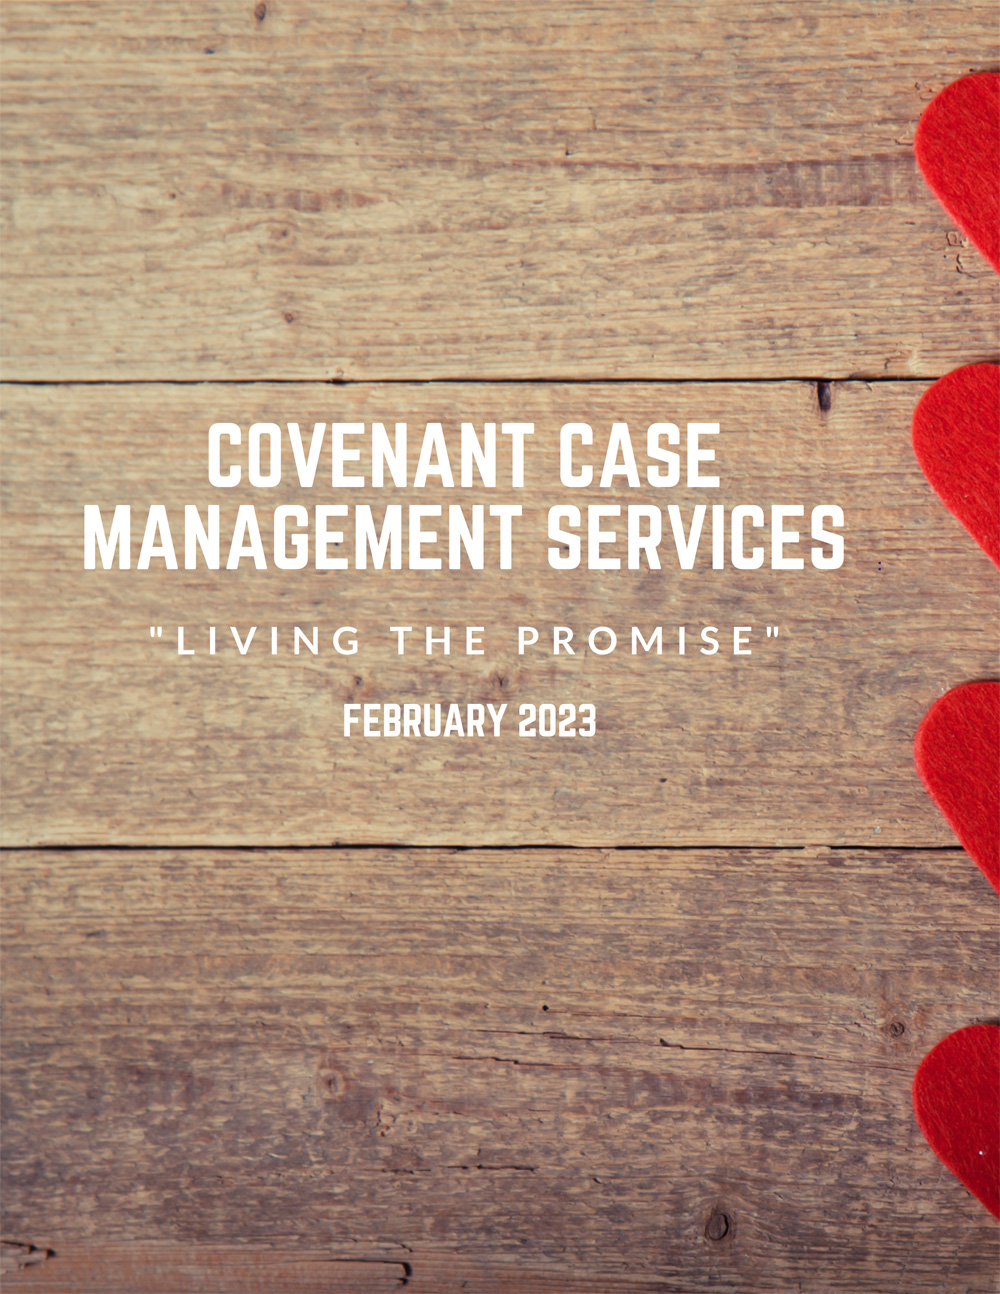 February 2023 Newsletter from Covenant Case Management Services